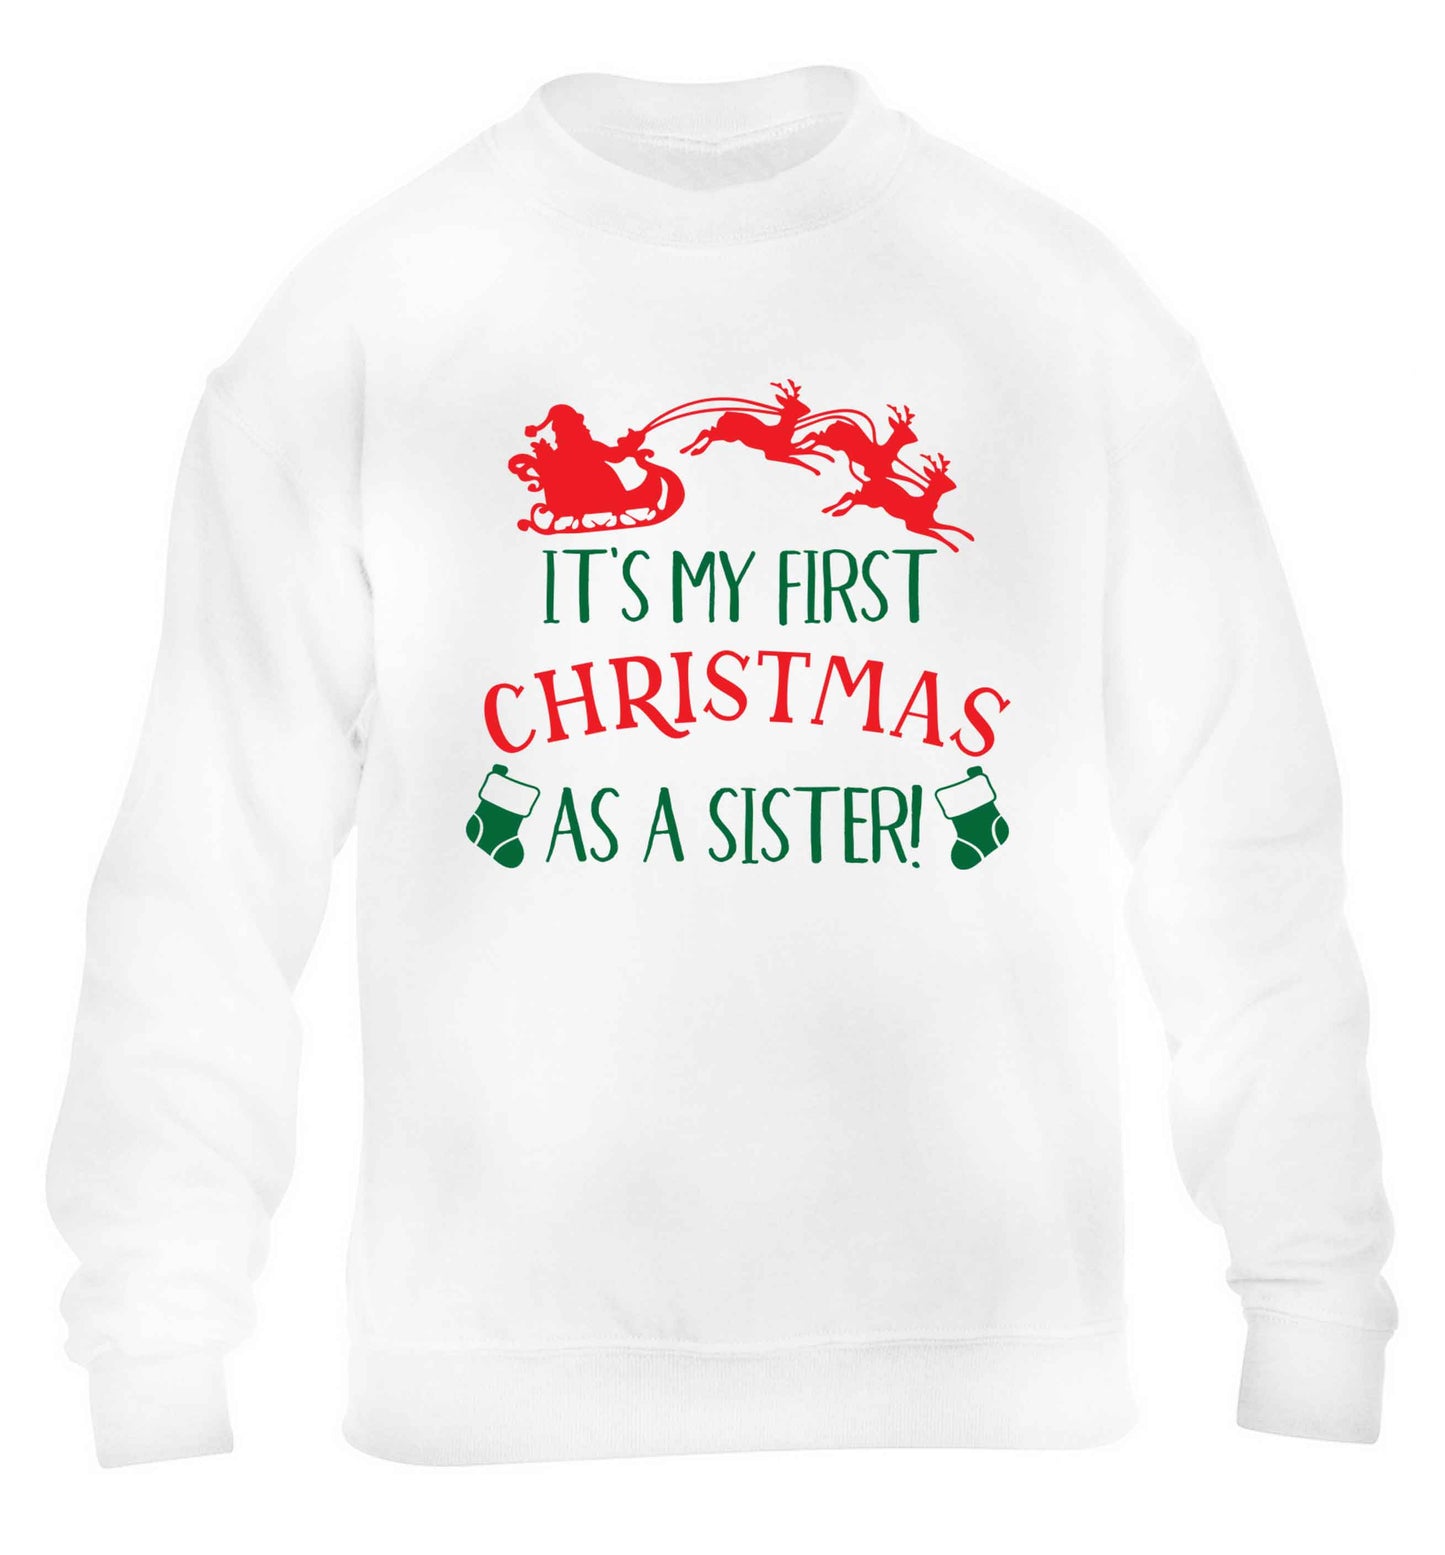 It's my first Christmas as a sister! children's white sweater 12-13 Years